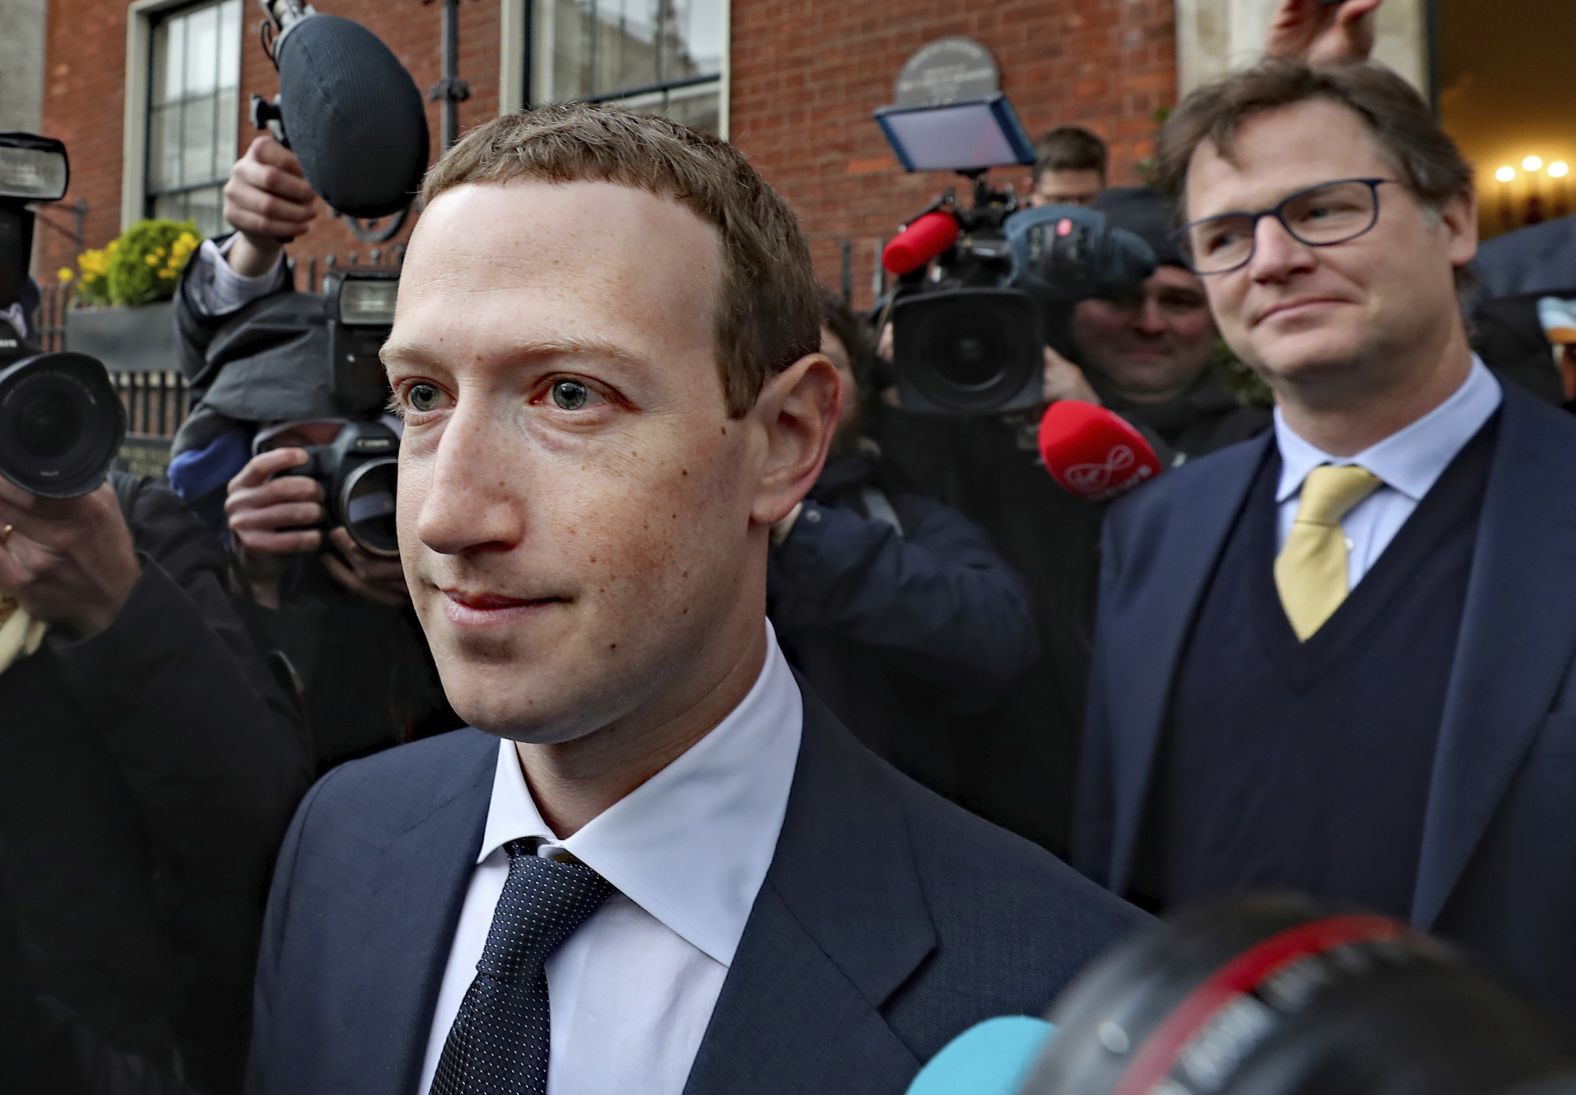 Zuckerberg leaves a hotel in Dublin, Ireland, with Nick Clegg, Facebook's head of global affairs, in February 2019. Clegg, a former UK deputy prime minister, defended Facebook's decision not to take action against inflammatory posts by US President Donald Trump, arguing that "defending free expression is important." Trump was later banned for two years in the wake of the US Capitol attacks on January 6, 2021.